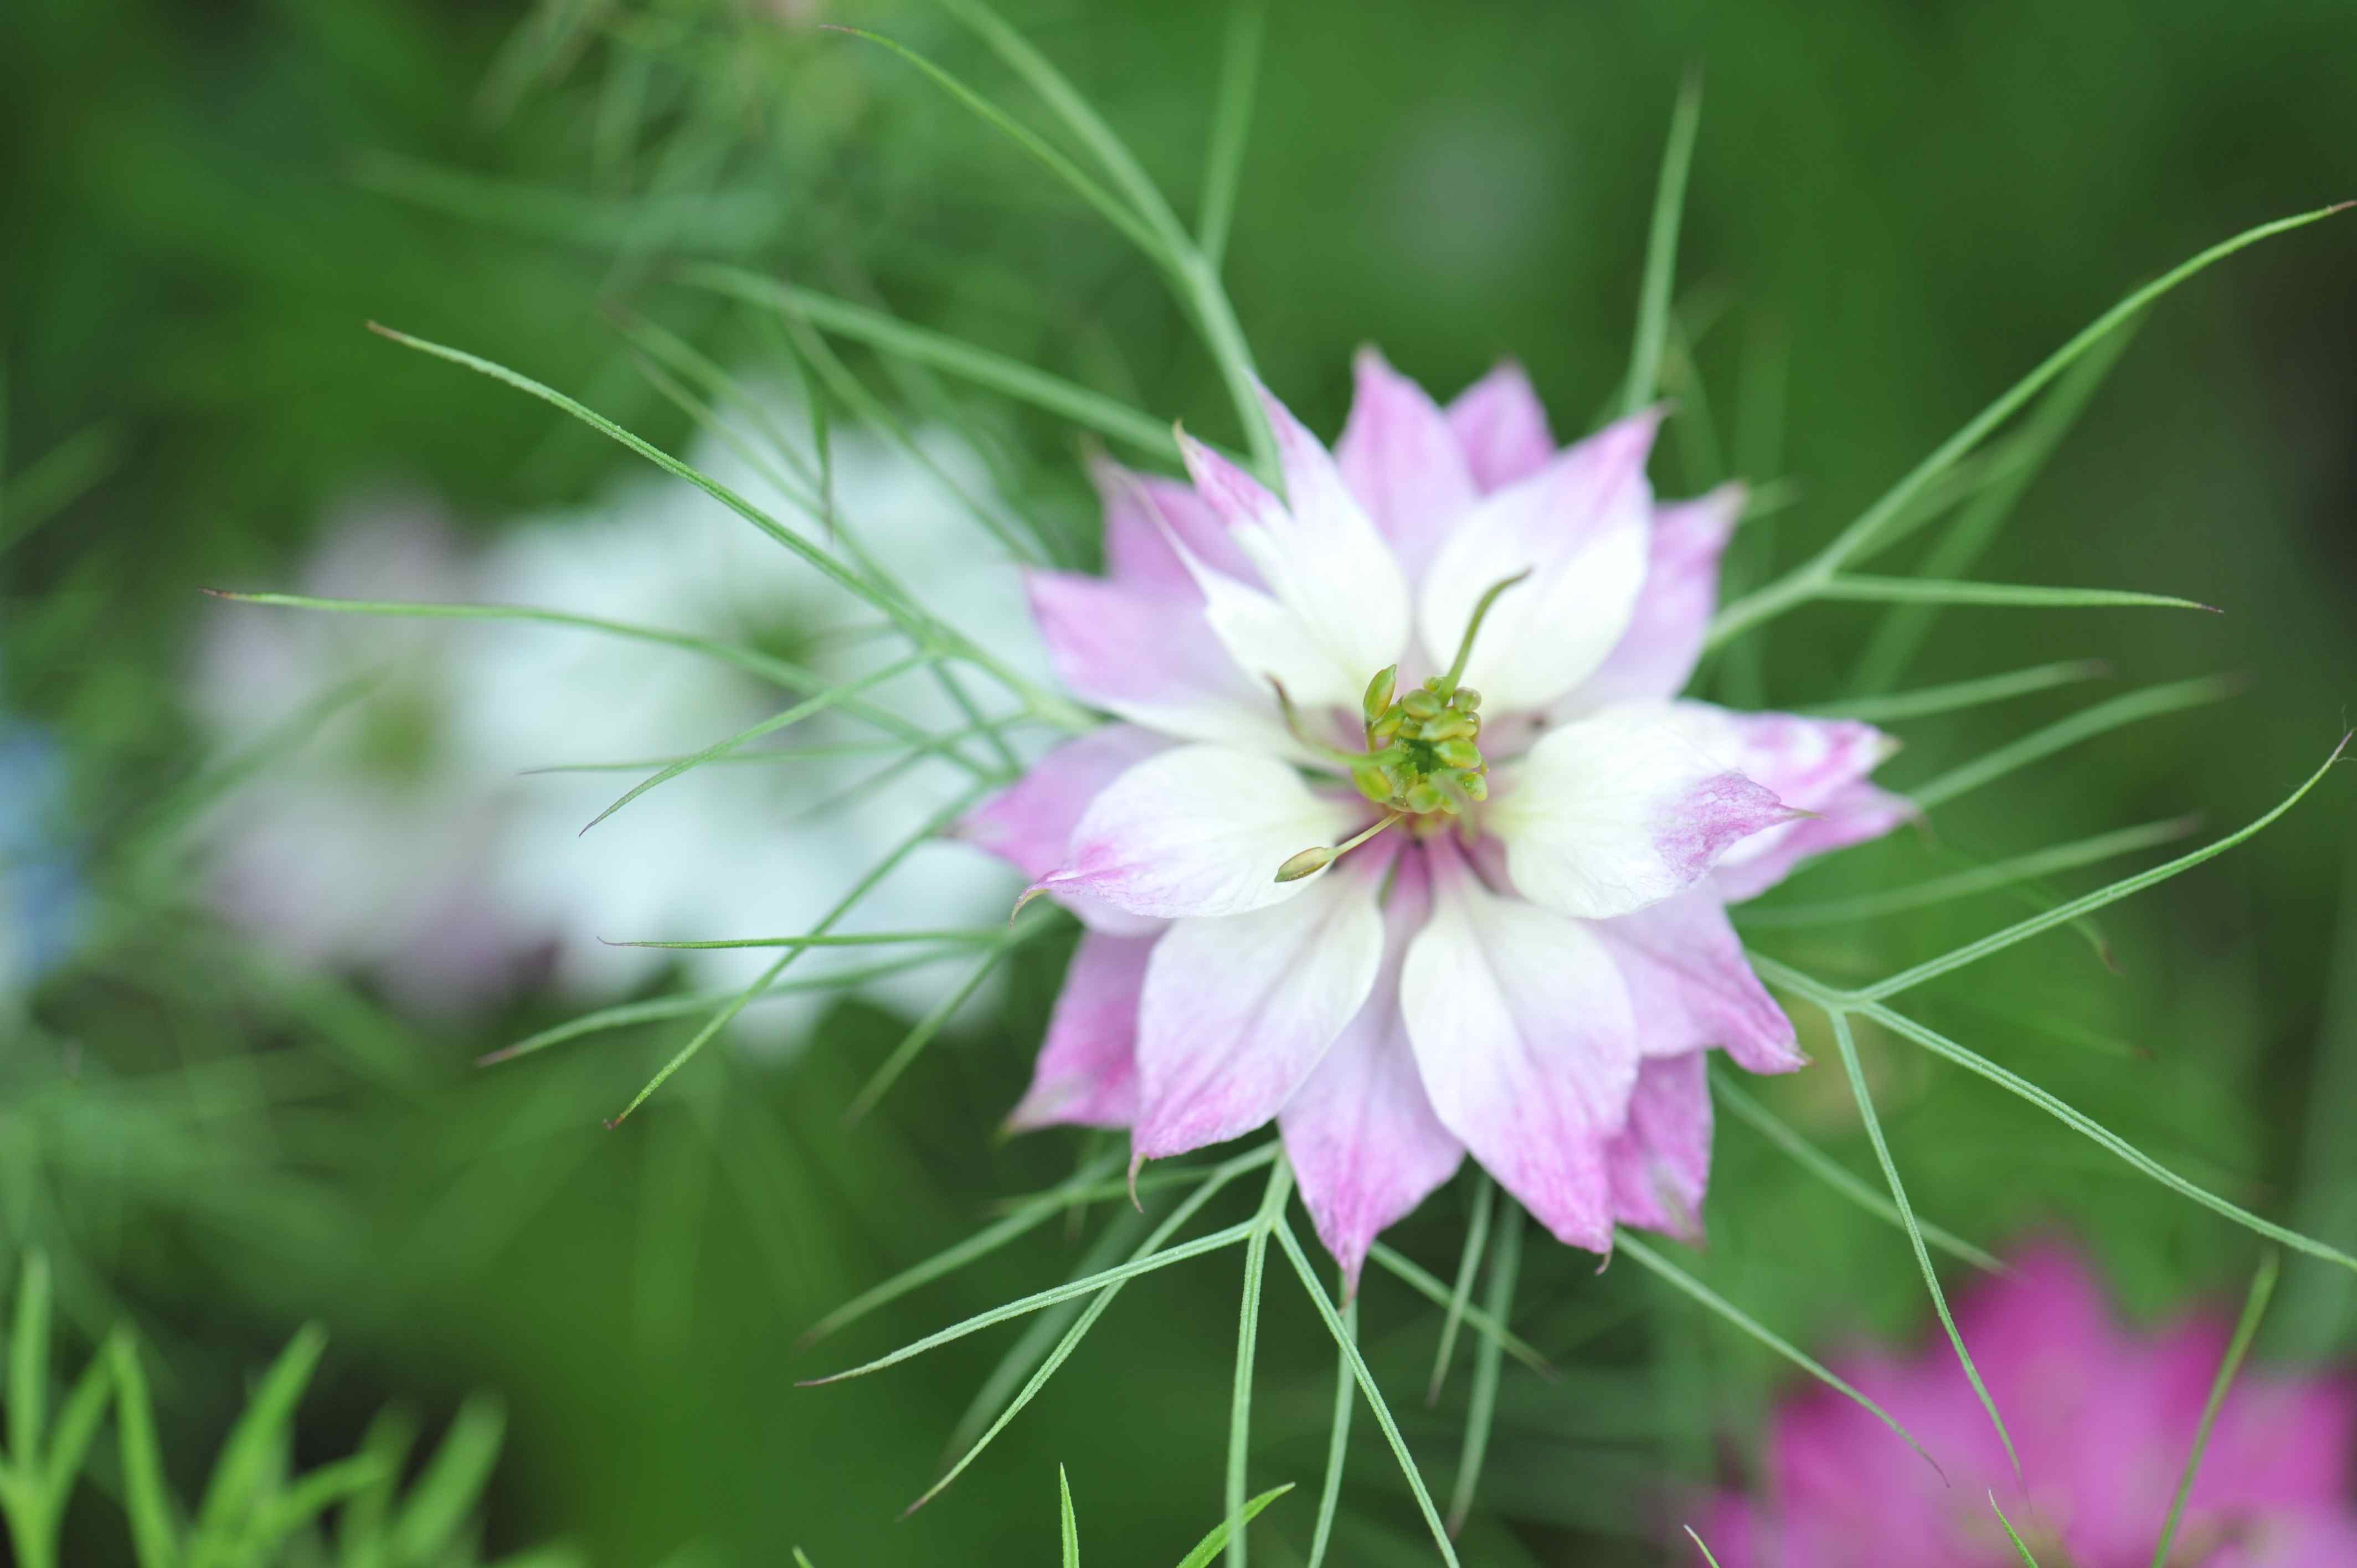 Top 10 Most Popular Flowers to Plant in Your Garden.